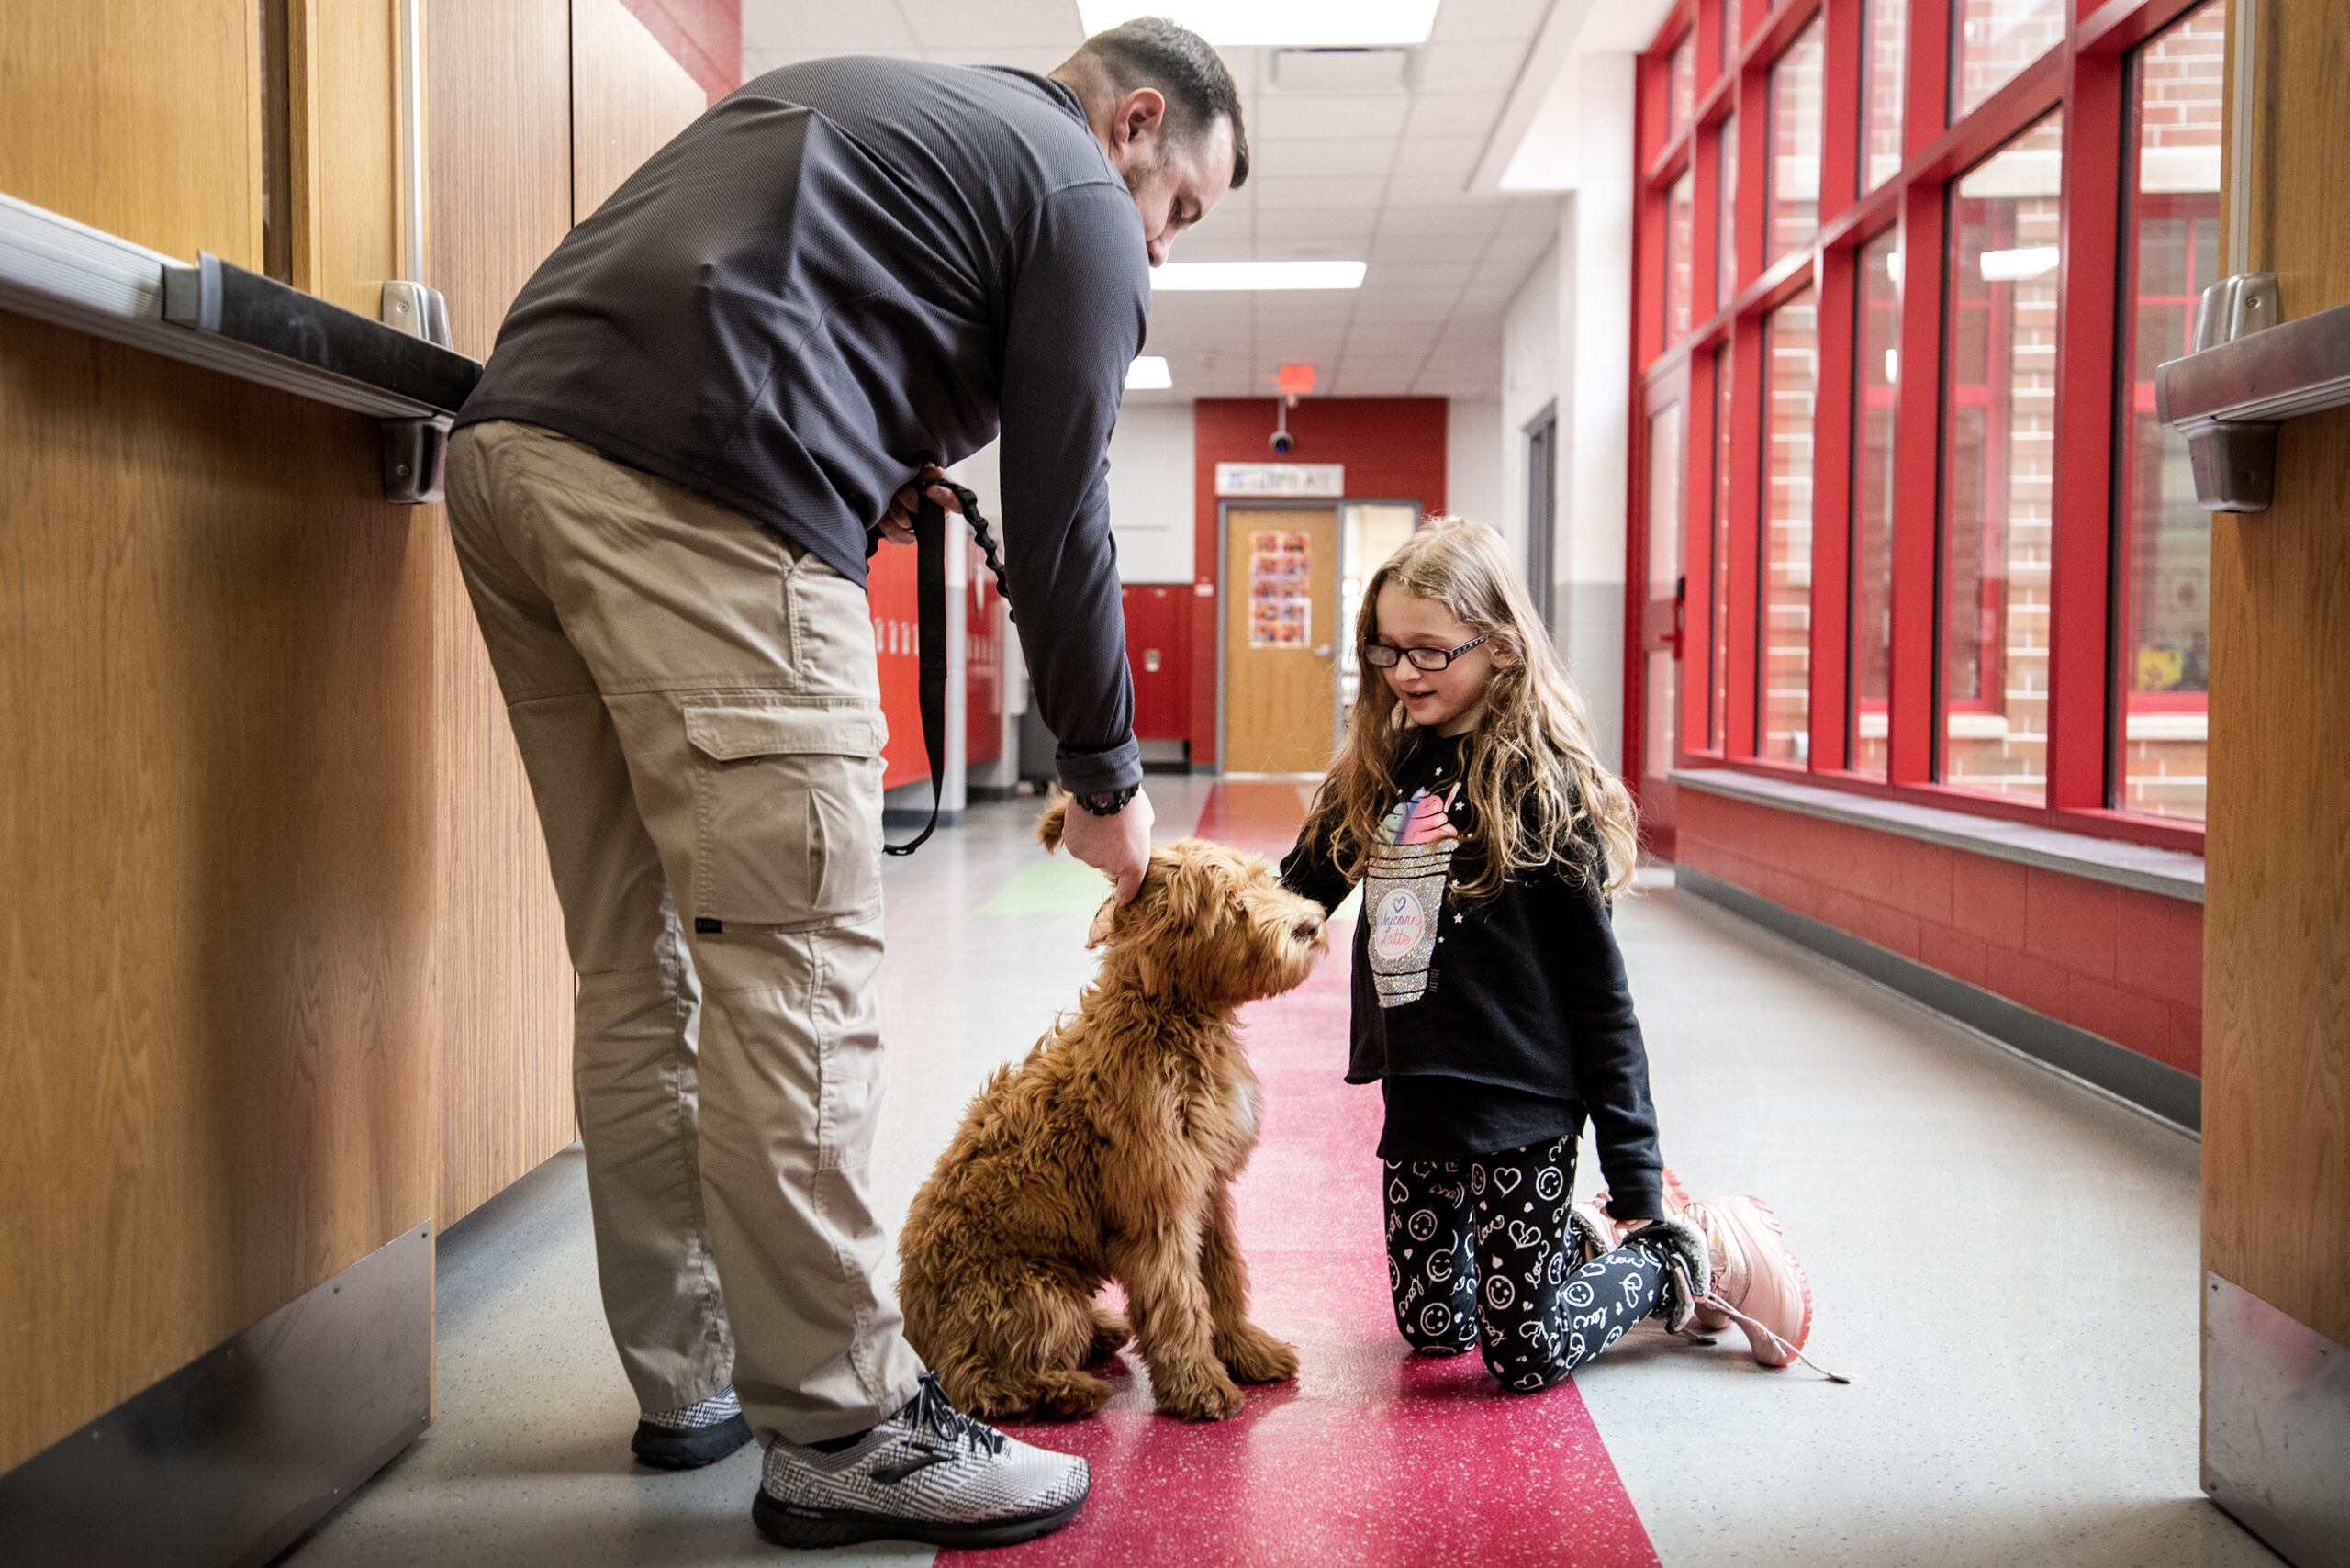 A girl kneels down to pet a brown dog in a school hallway.